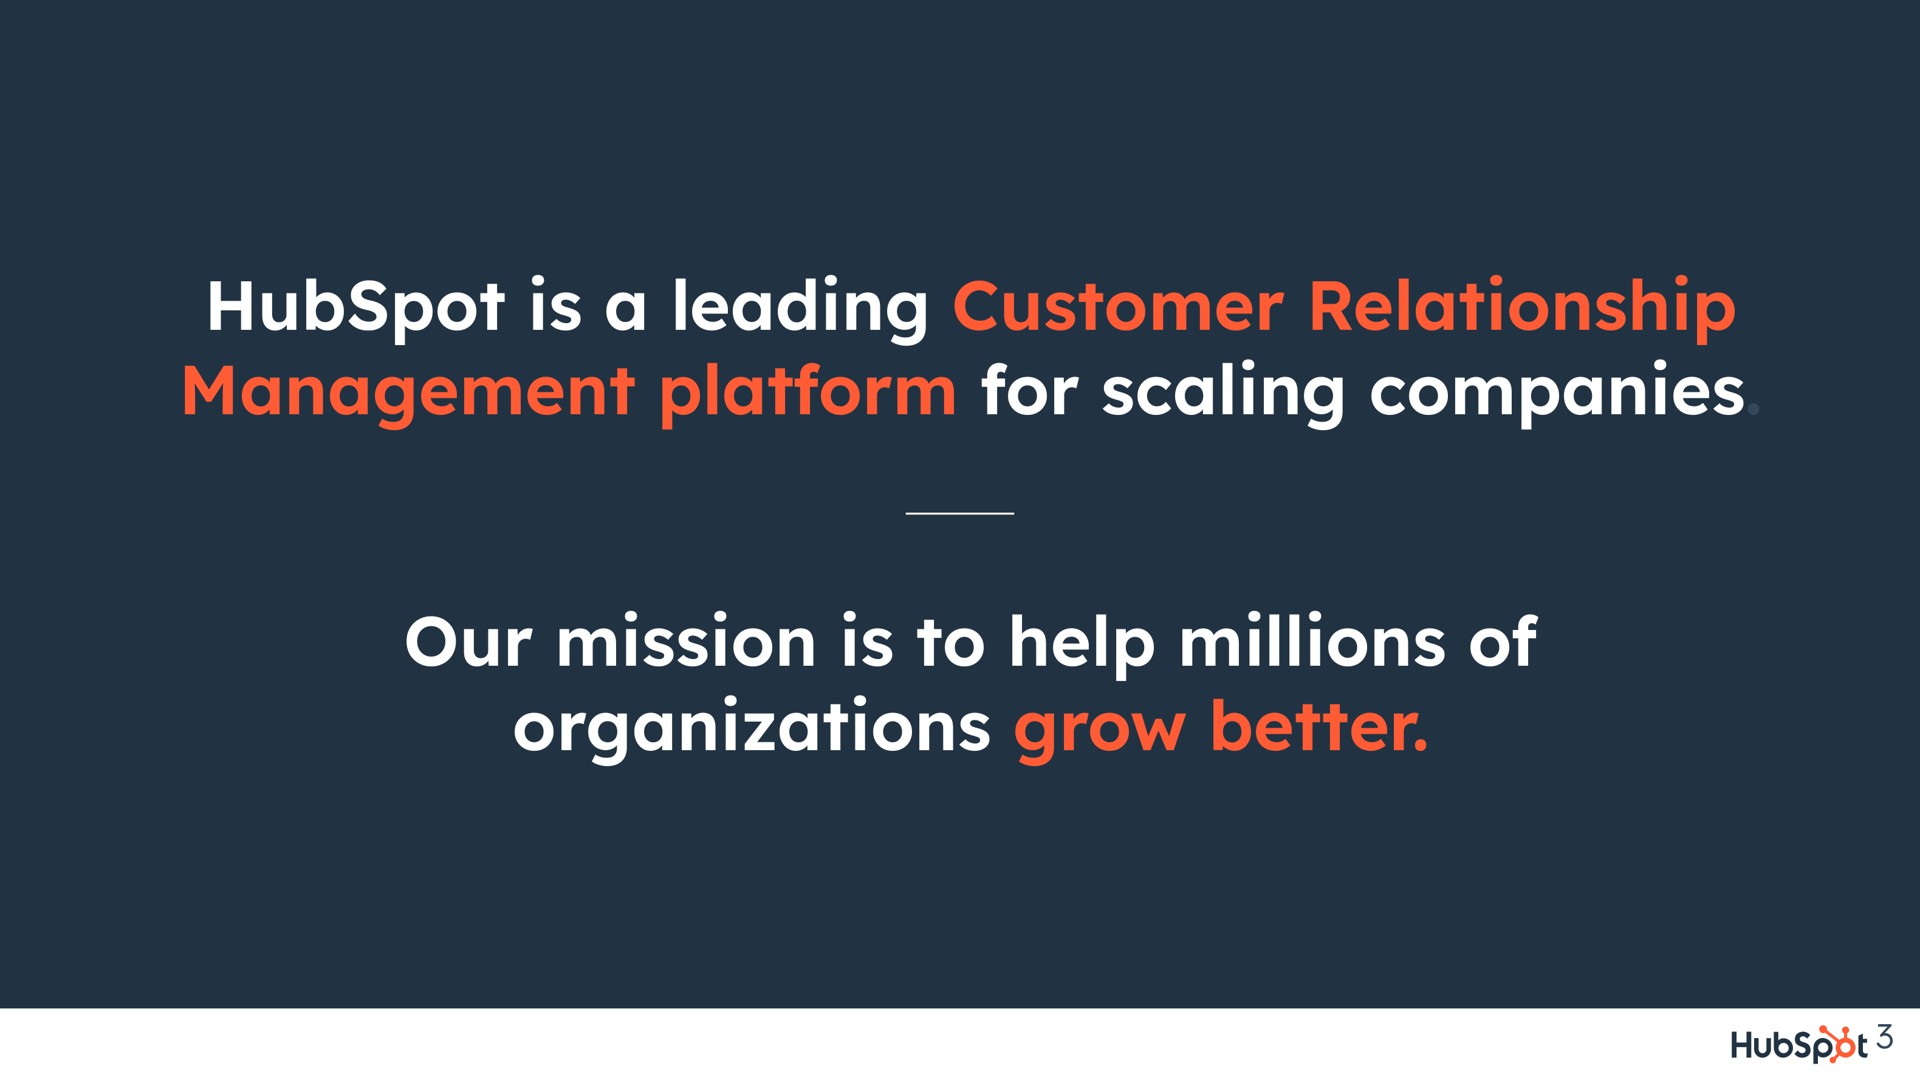 is a leading customer relationship management platform for scaling companies our mission is to help millions of organizations grow better | Hubspot